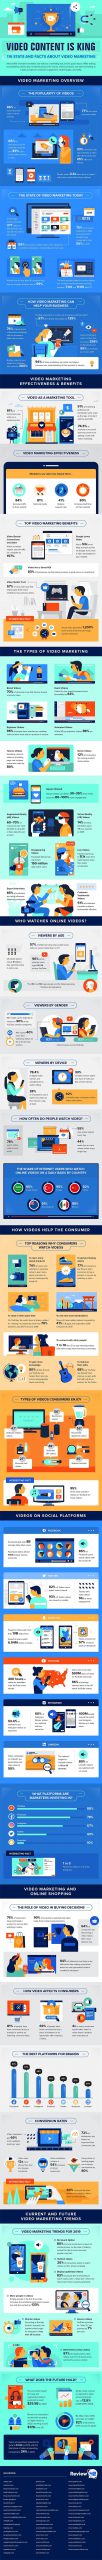 116 video marketing stats to guide your online marketing strategy in 2020 infographic scaled 1